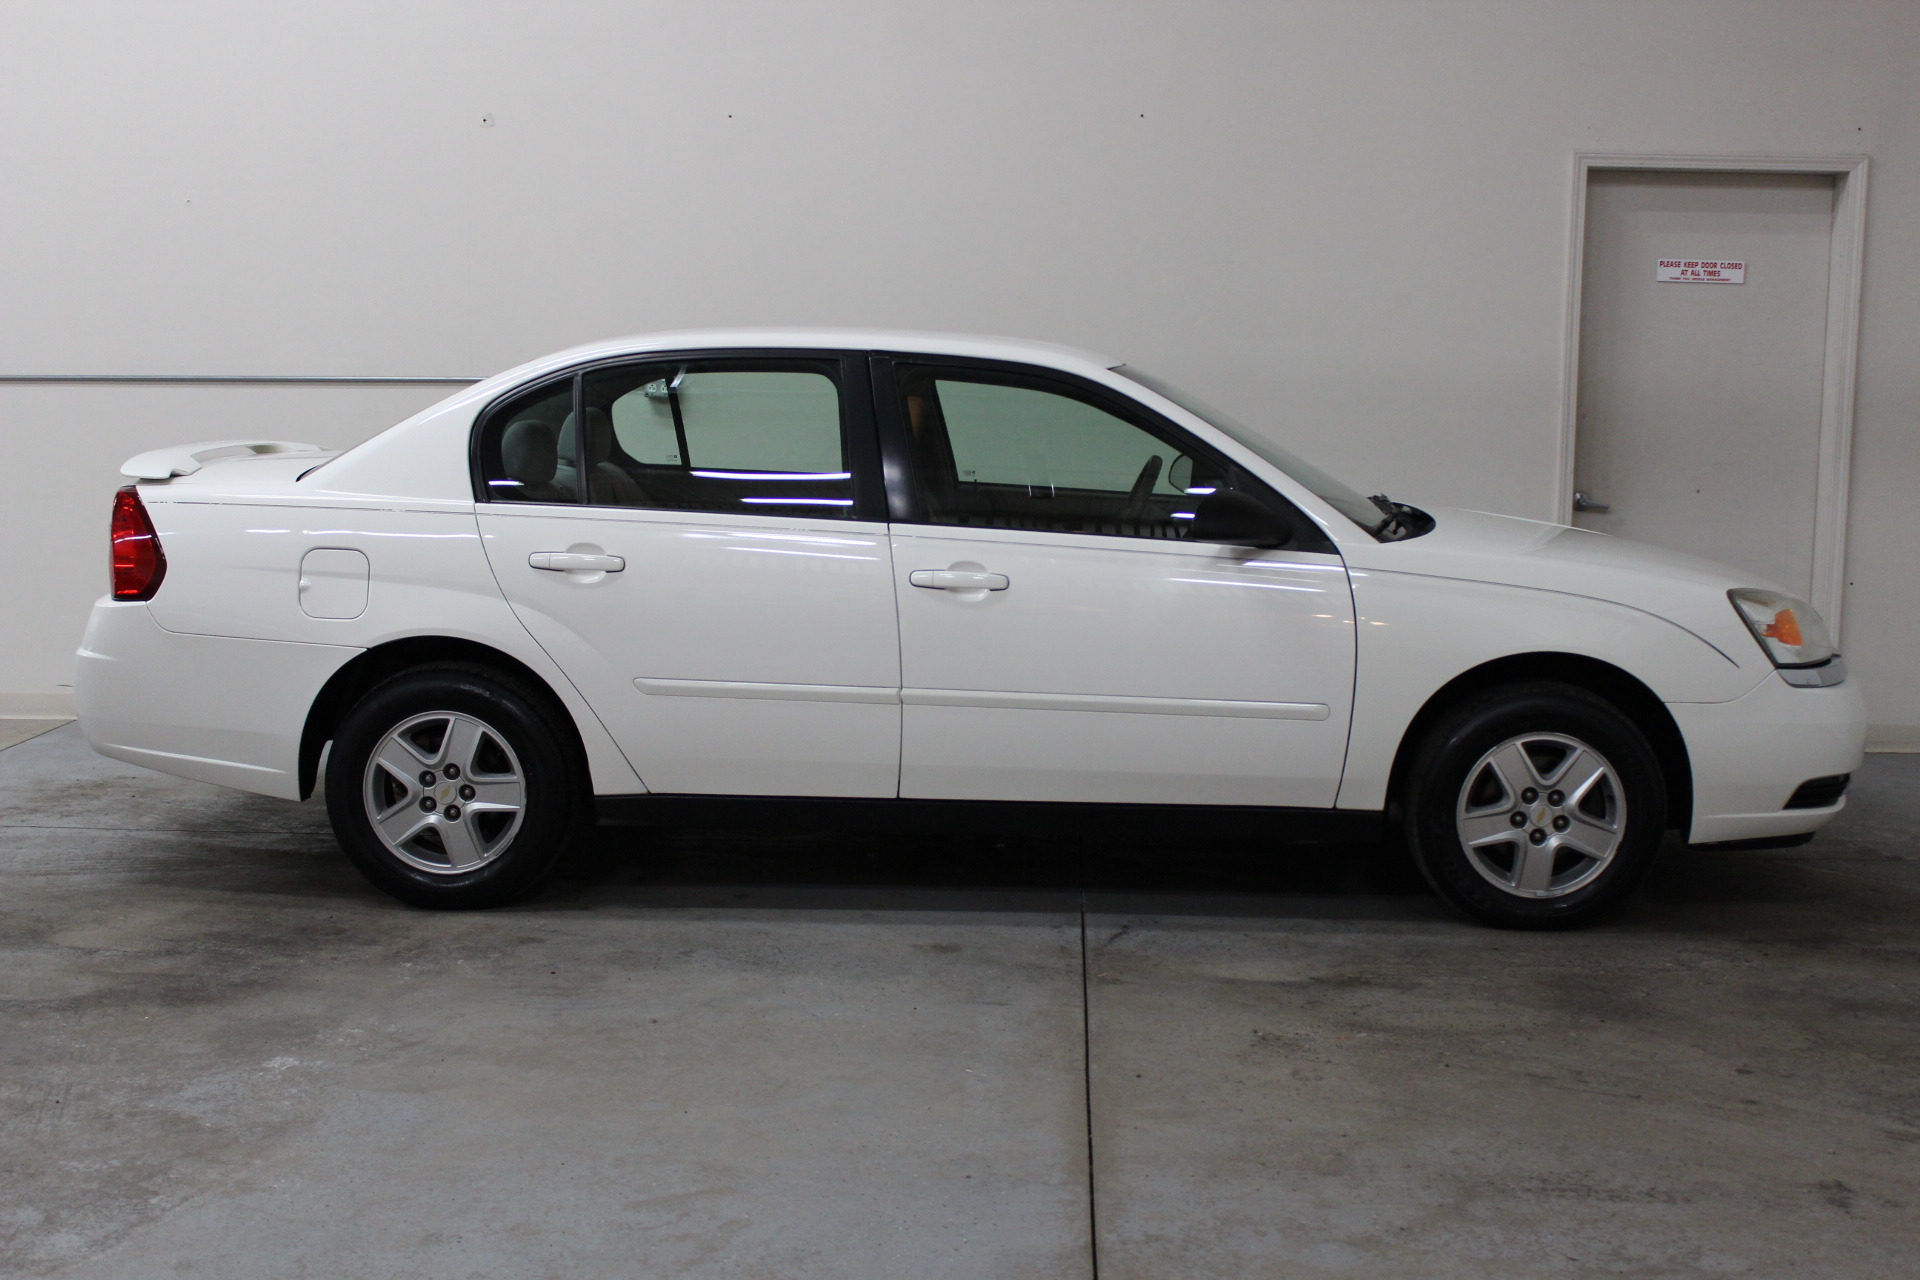 2005 Chevrolet Malibu LS - Biscayne Auto Sales | Pre-owned Dealership |  Ontario, NY